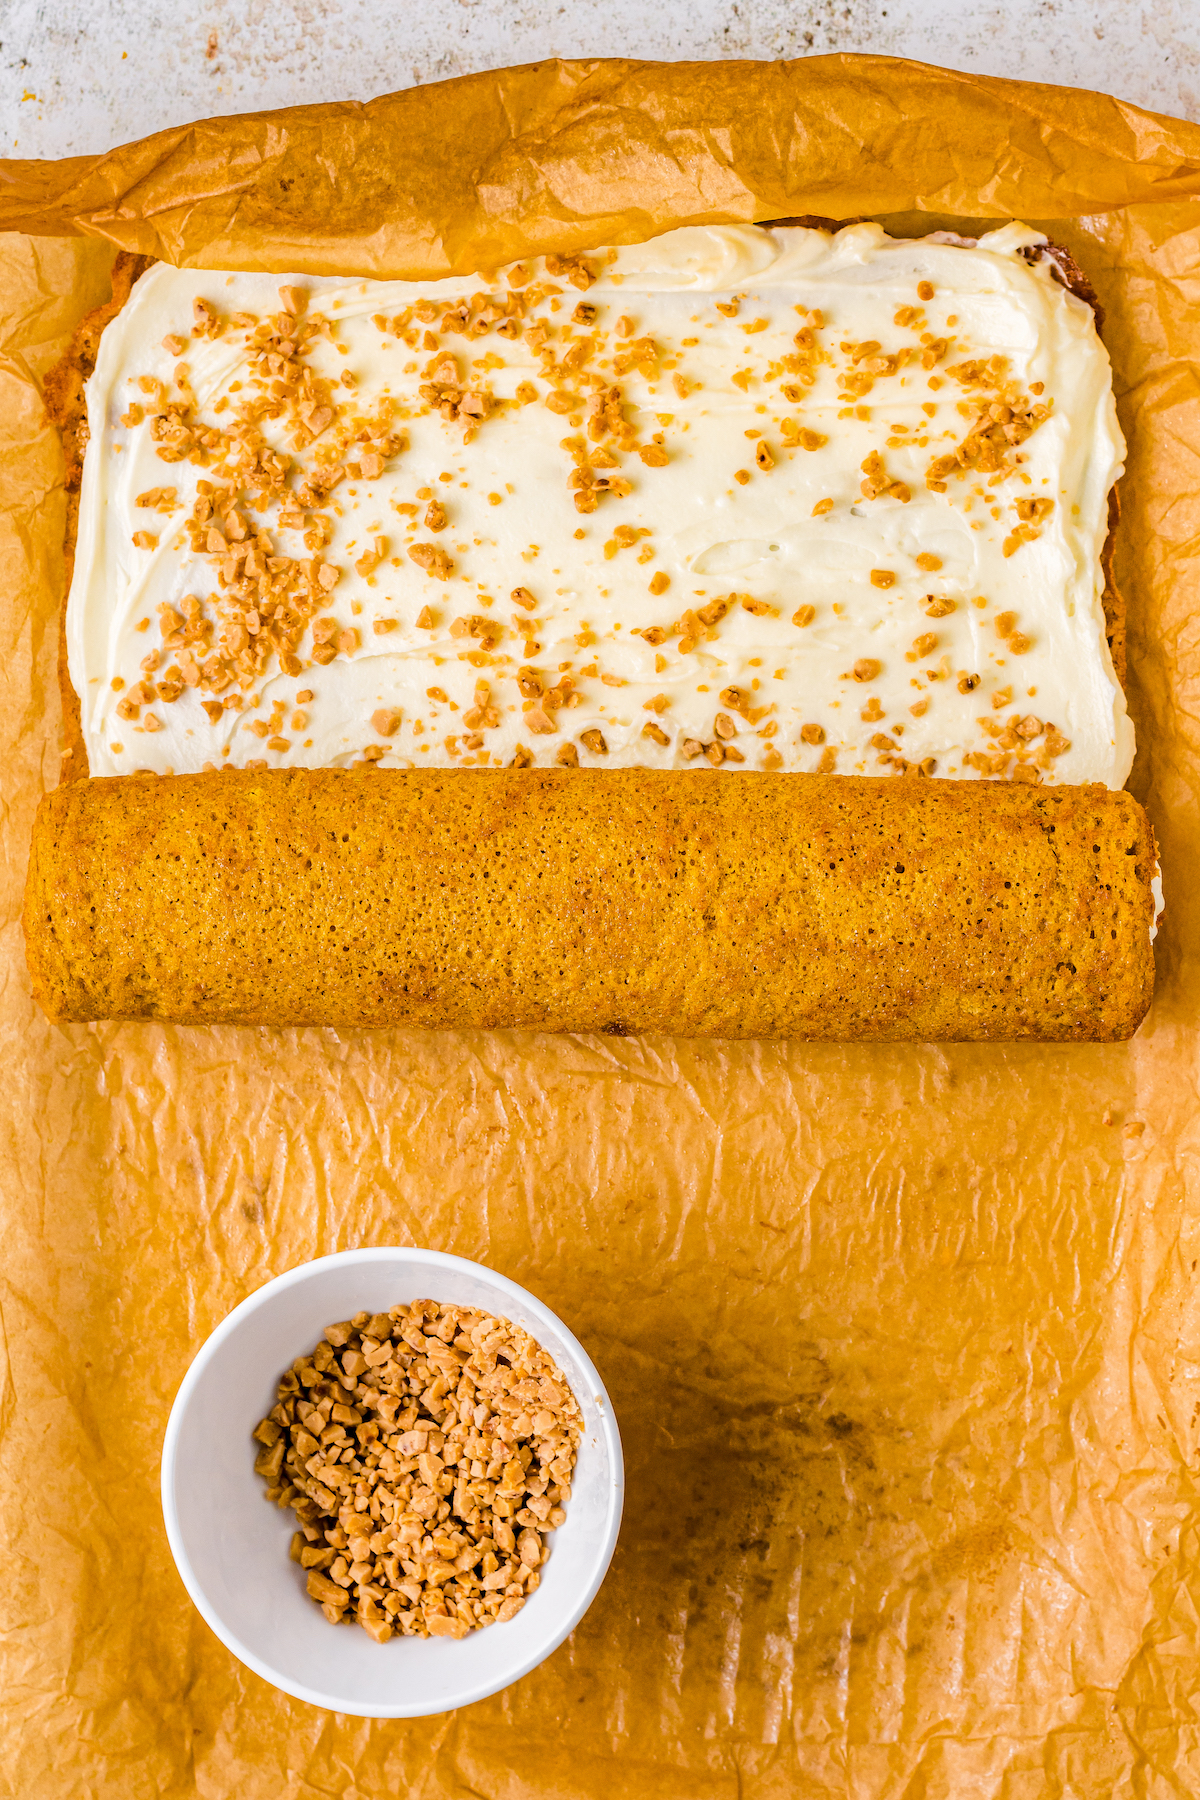 A pumpkin roll cake being rolled up around creamy filling and toffee bits.